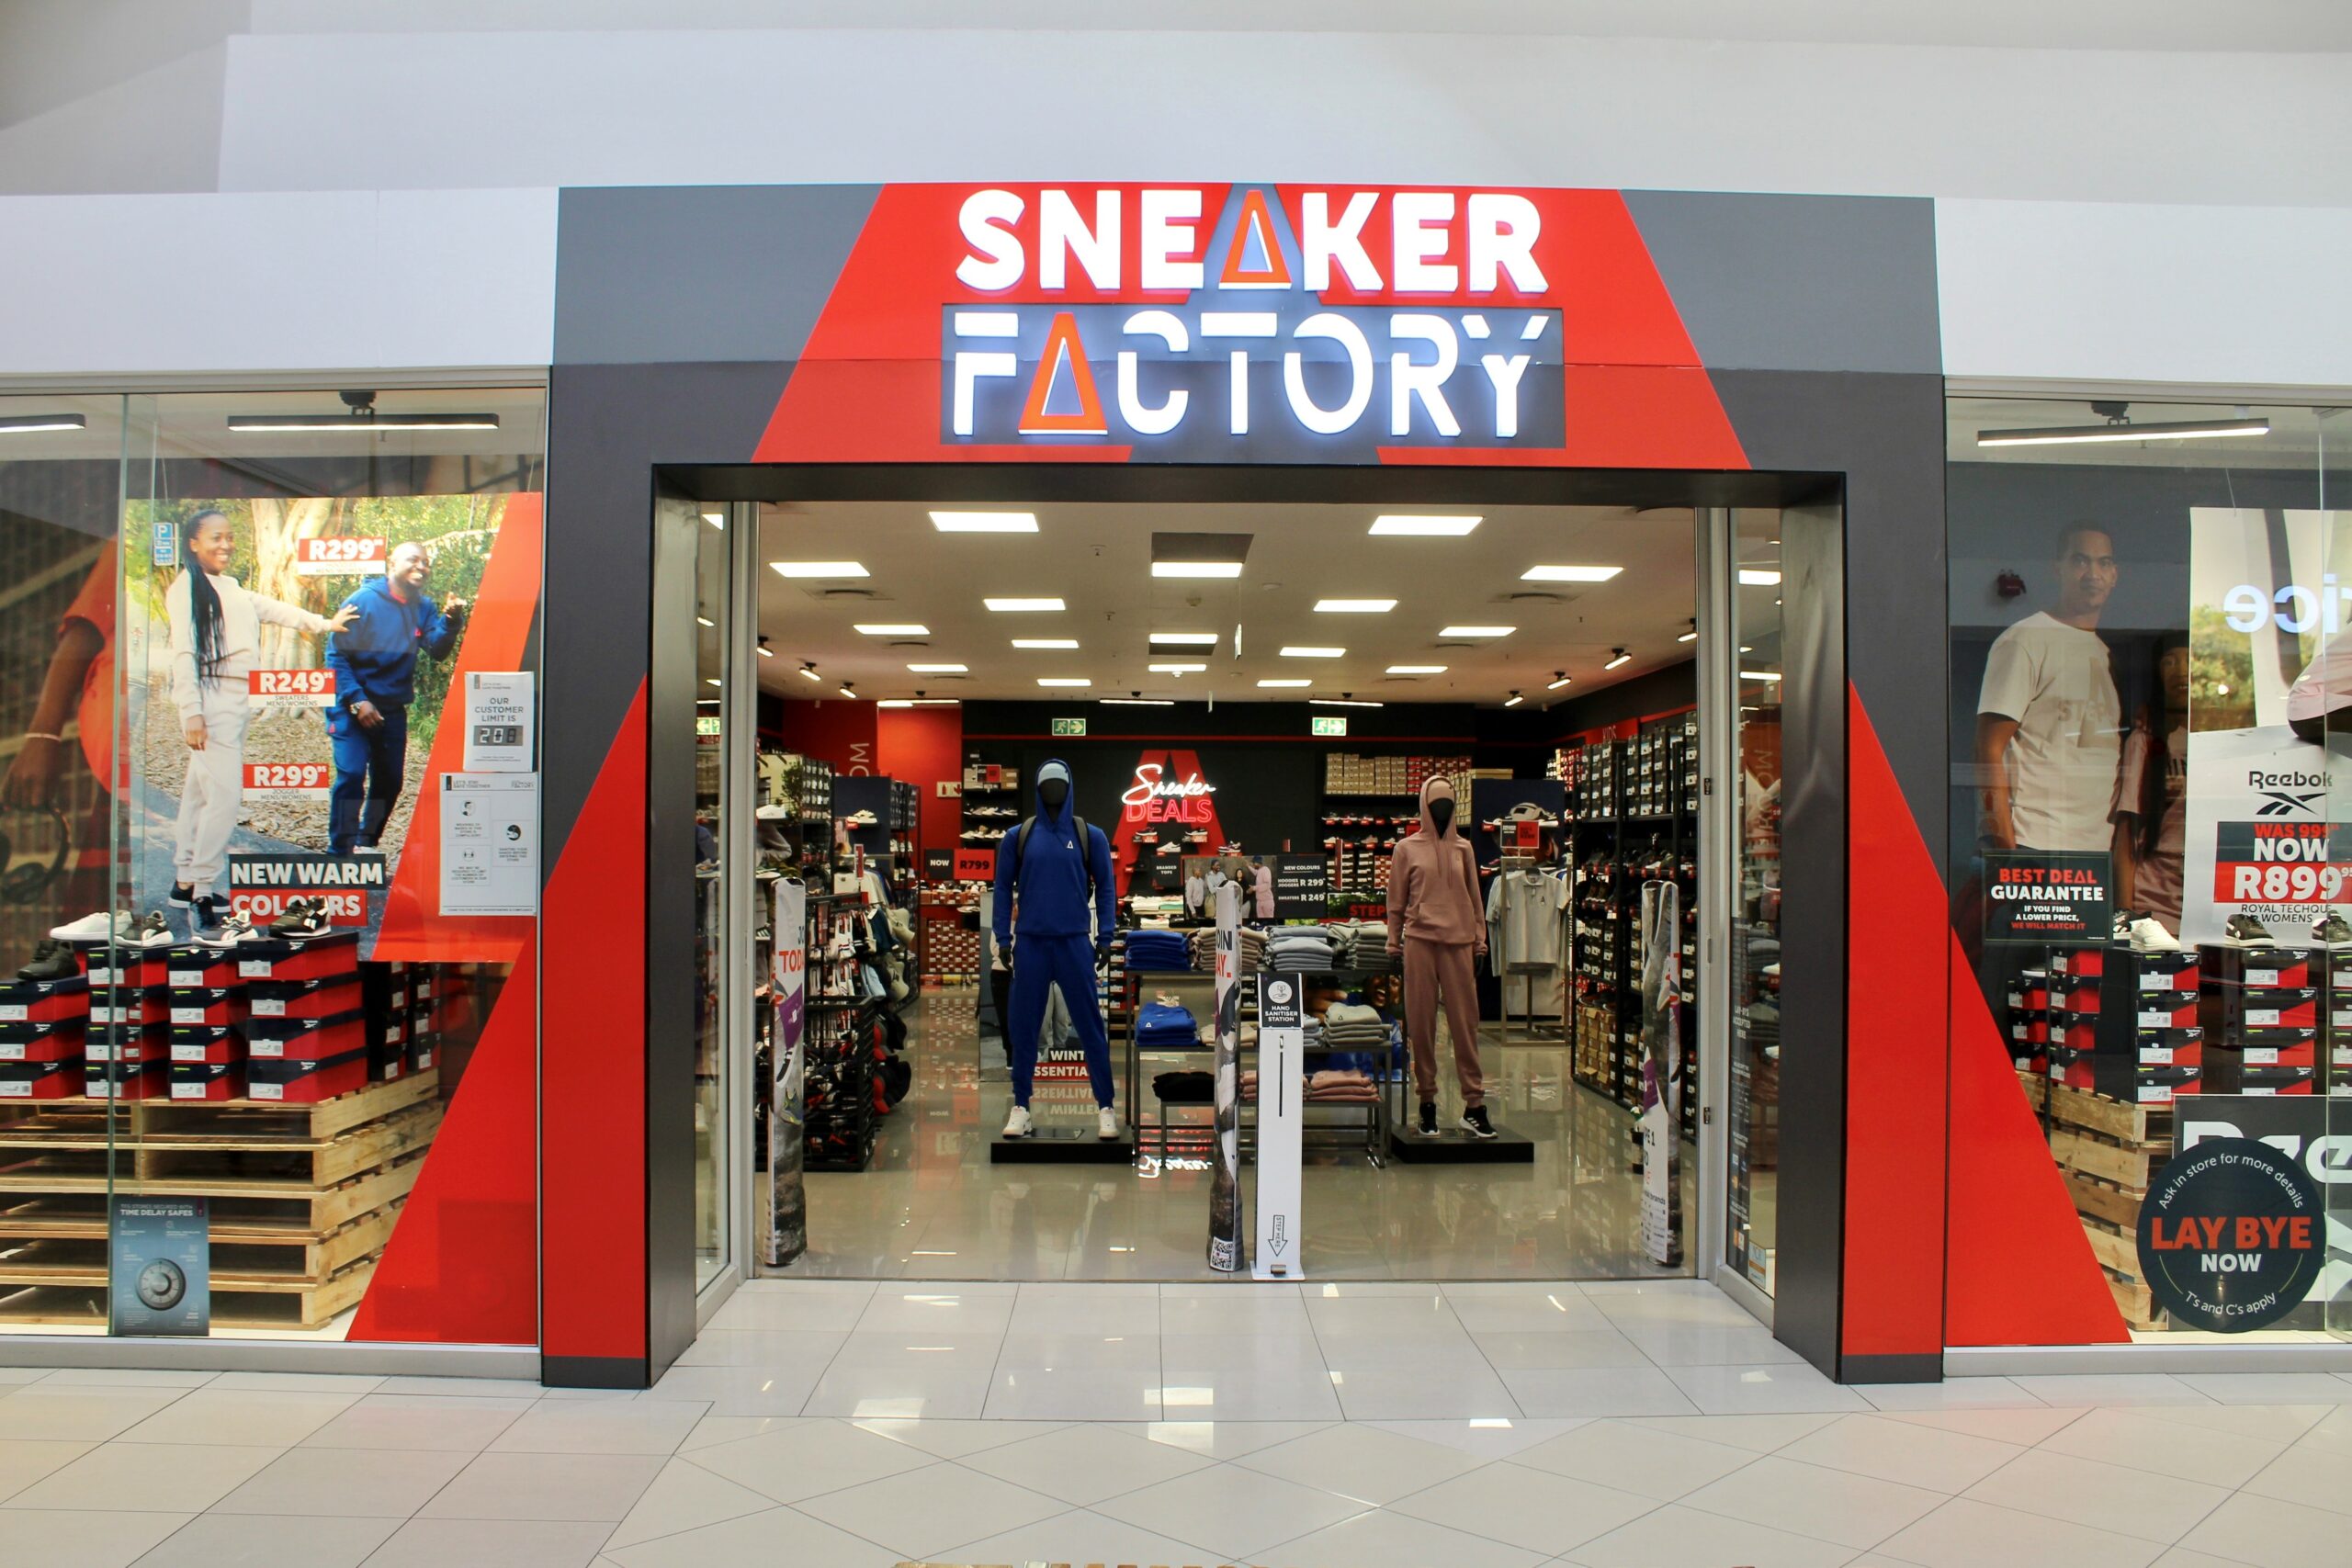 The Sneaker Factory